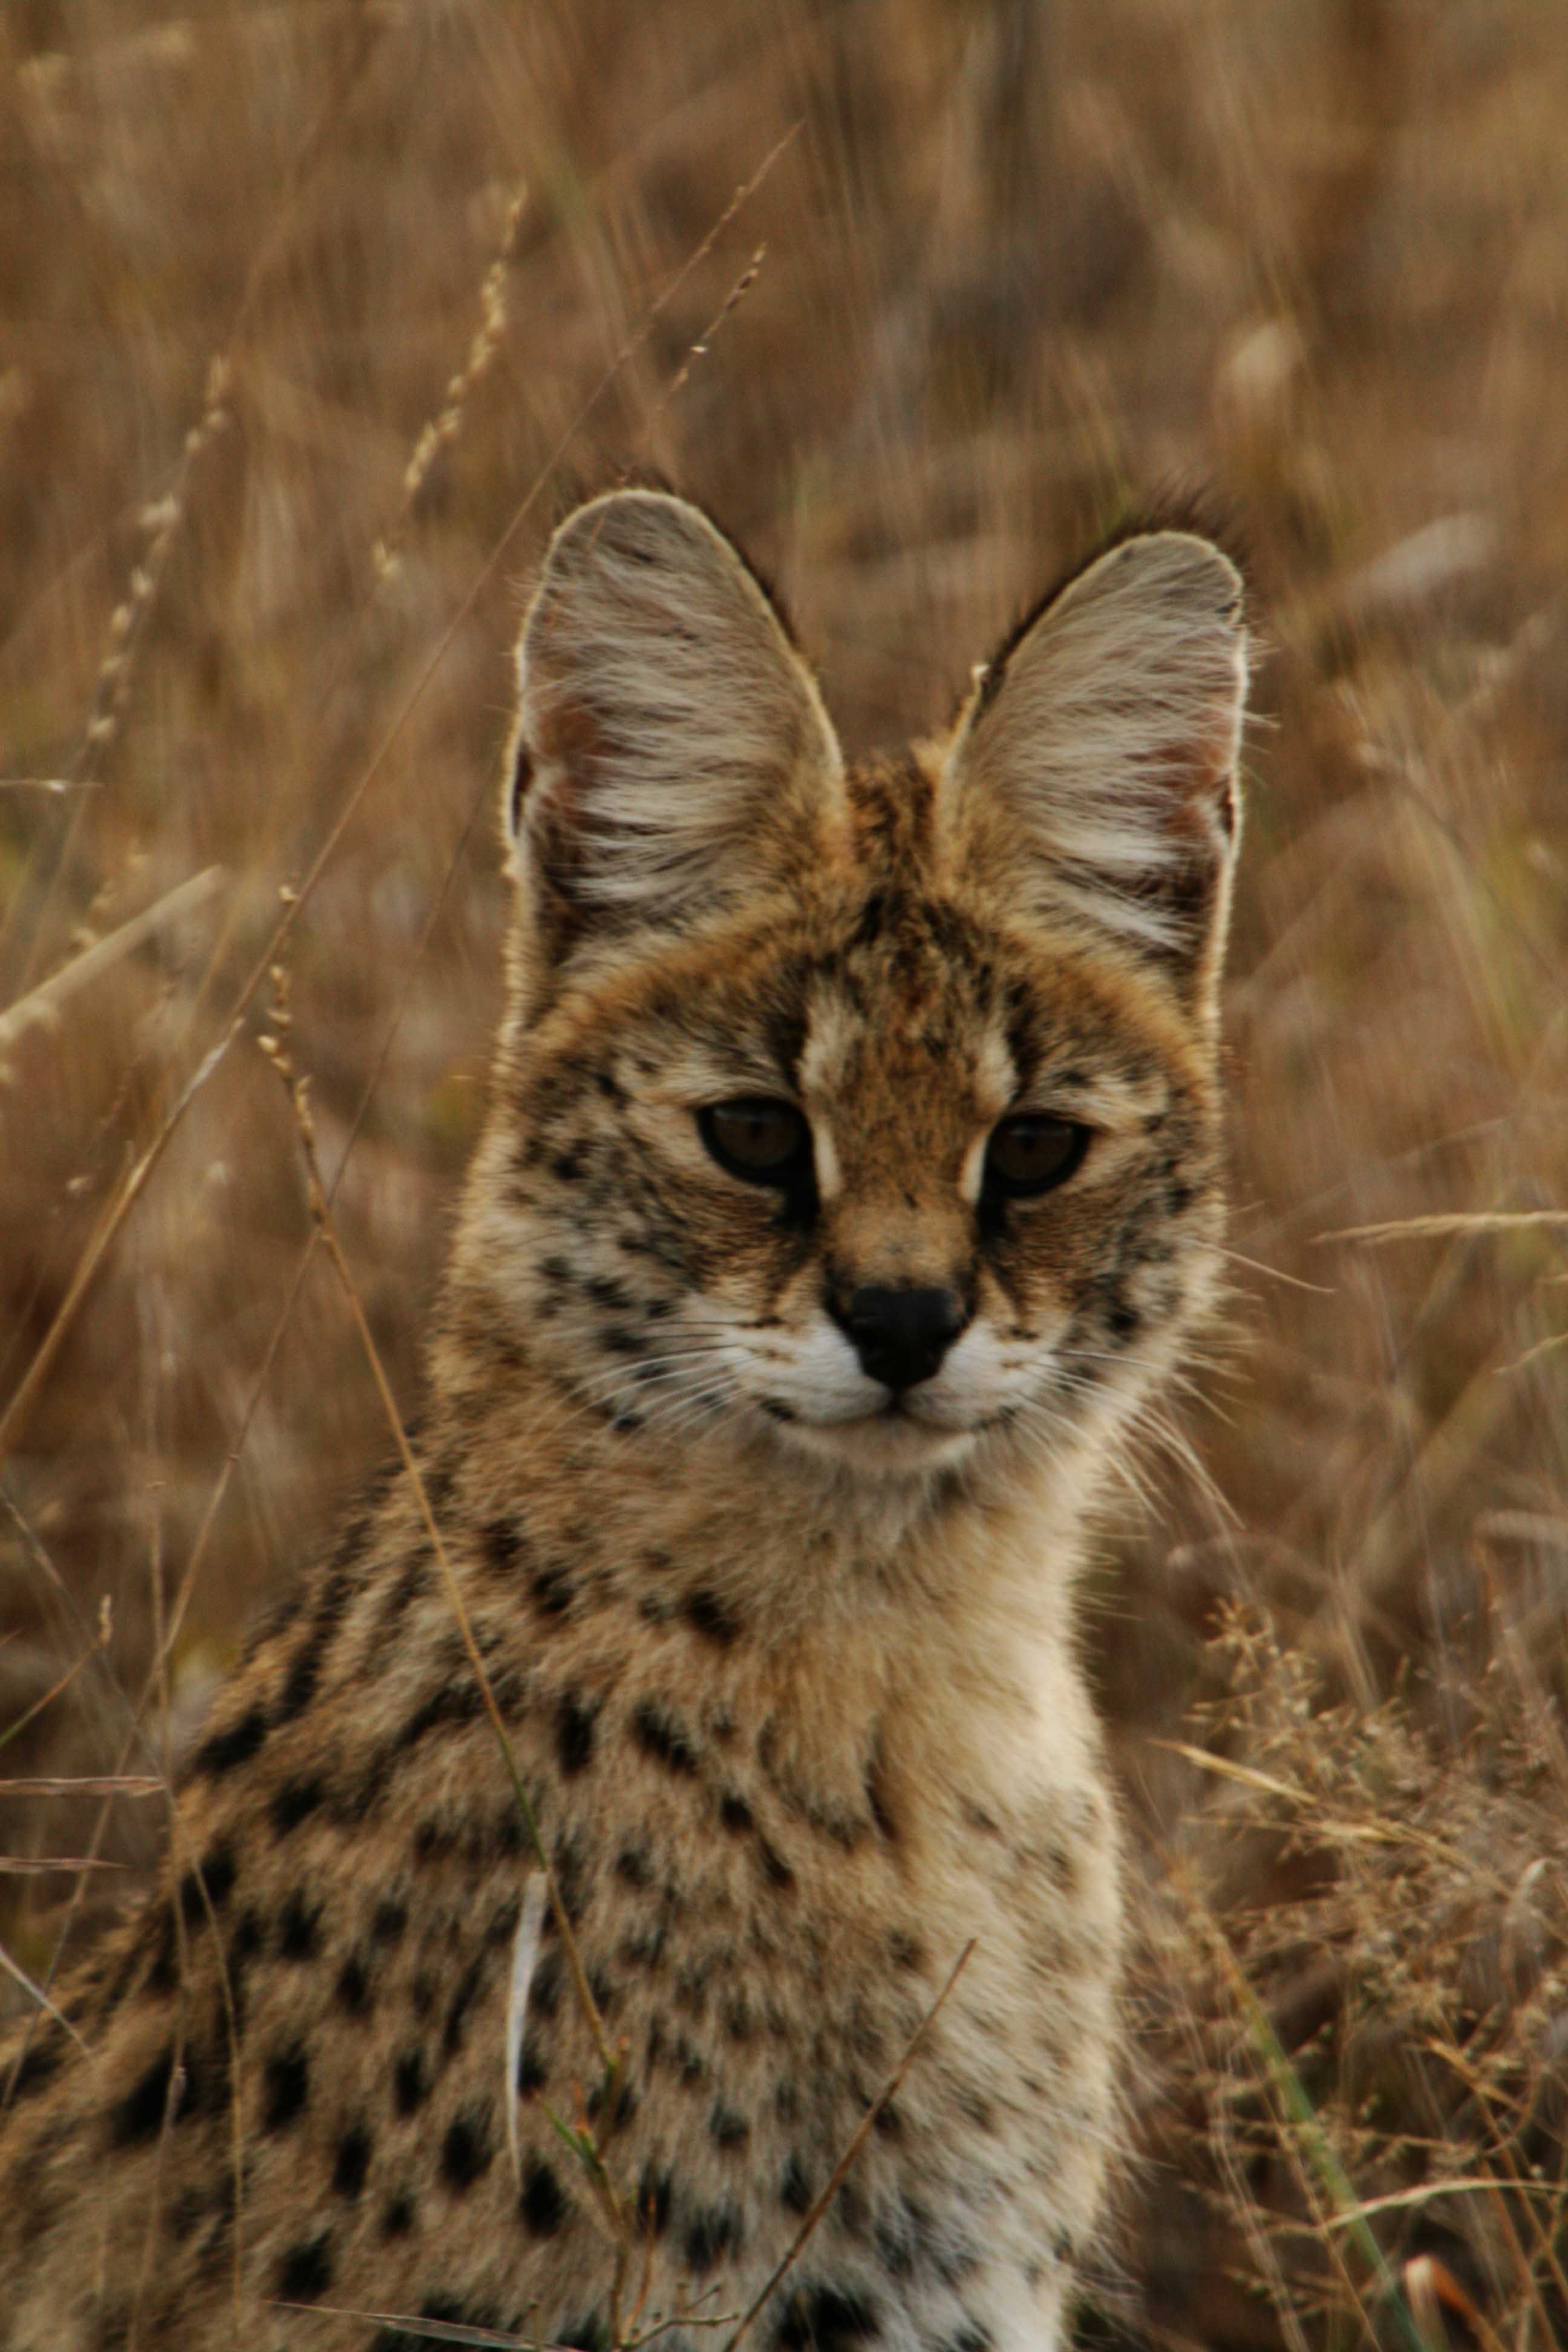 http://dic.academic.ru/pictures/wiki/files/83/Serval_portrait.jpg